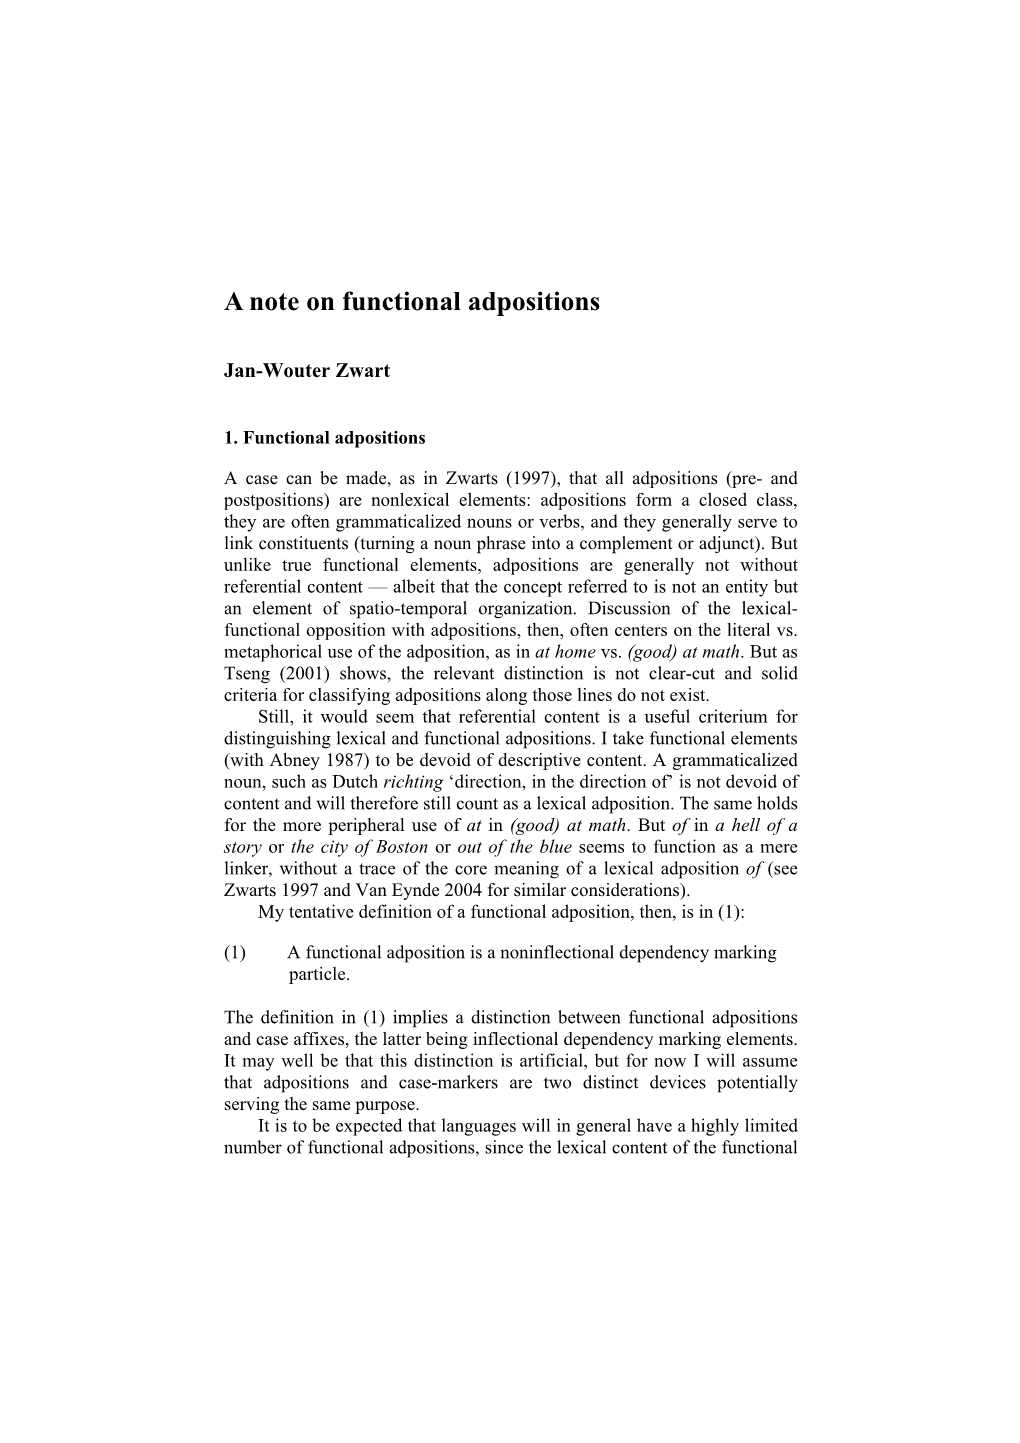 A Note on Functional Adpositions